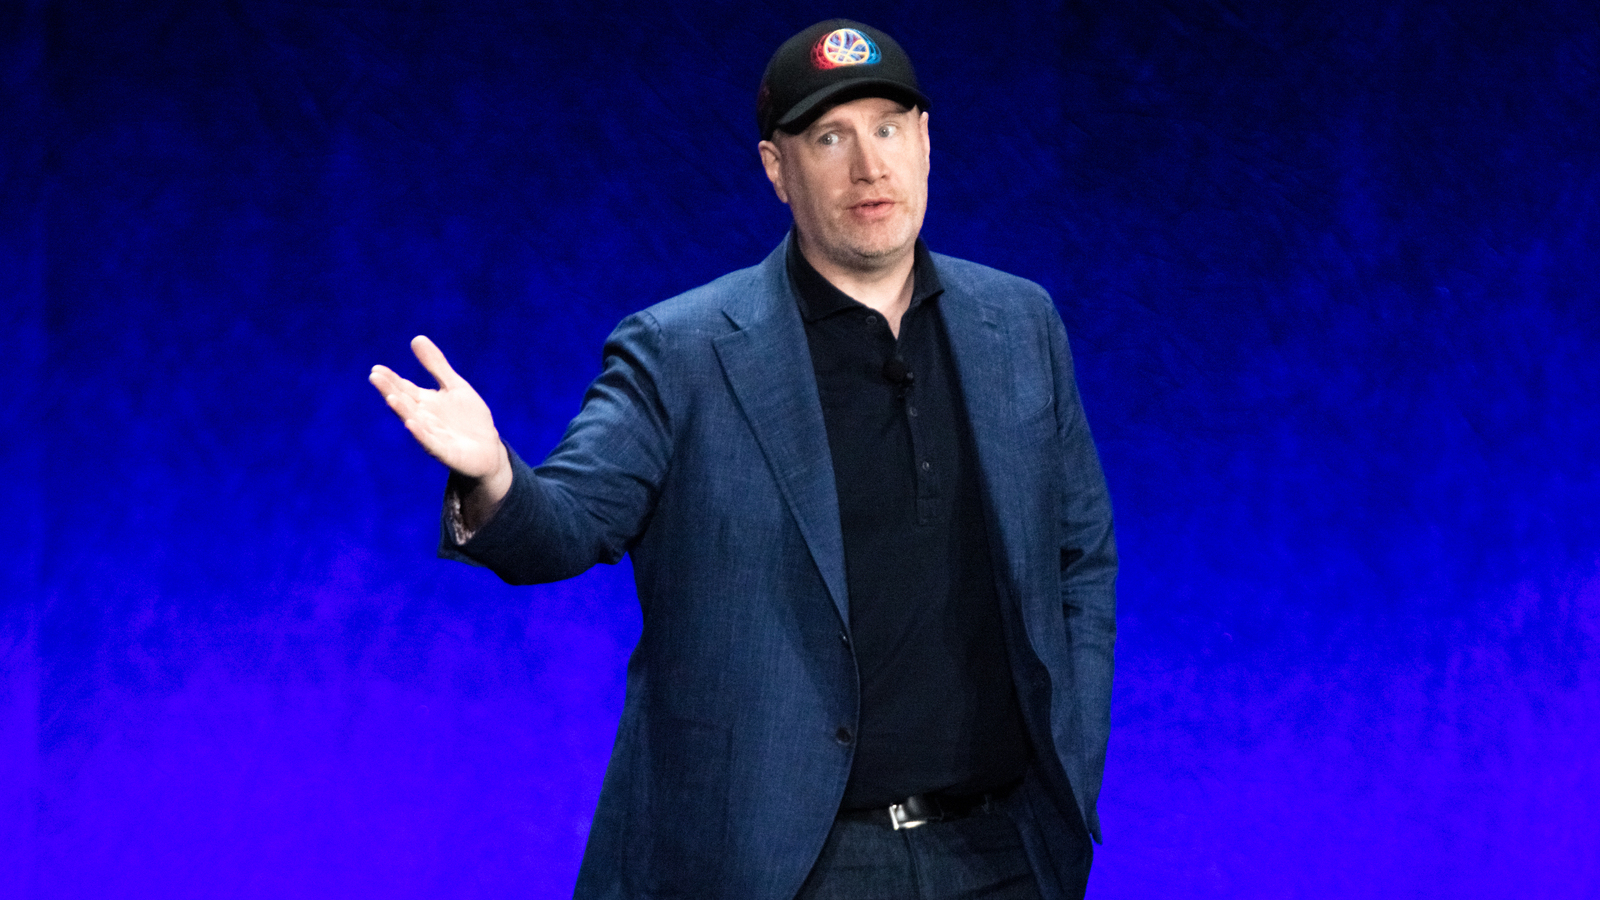 Kevin Feige on stage at CinemaCon 2022